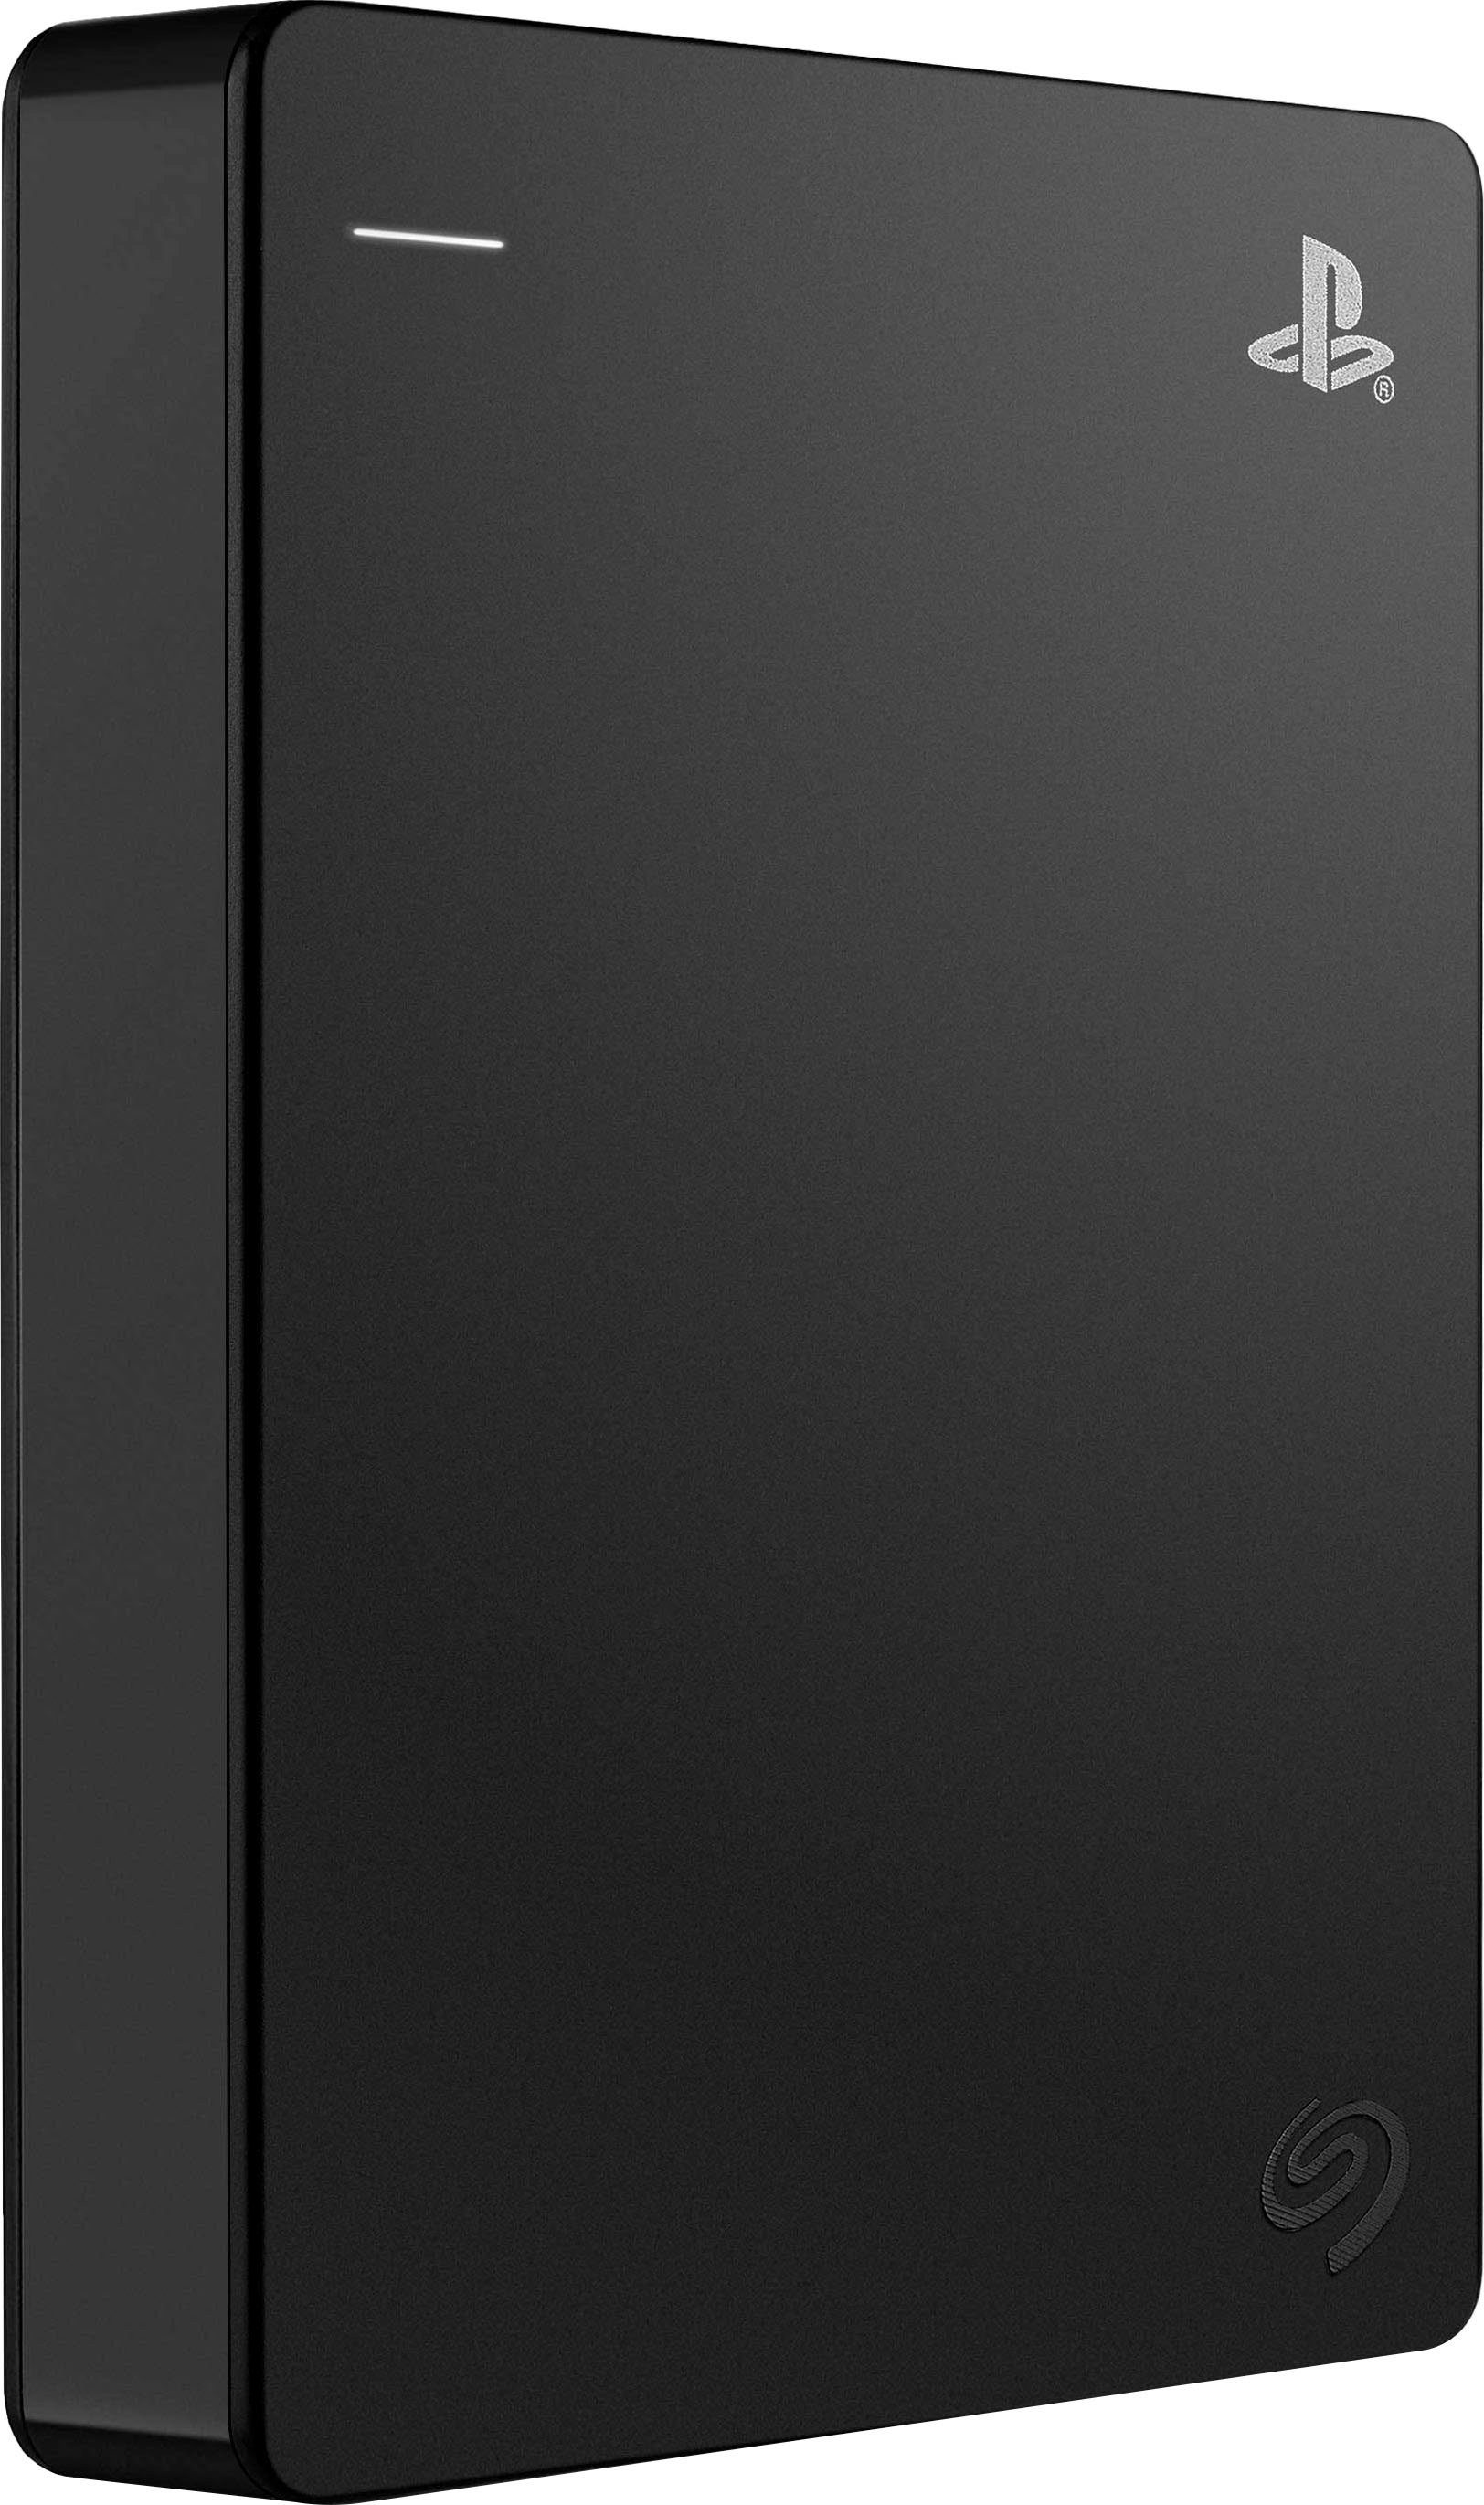 Seagate Game Drive 4TB MB/S (4 externe PS4/PS5 HDD-Festplatte / (USB Mbps Gbps für 3.0) 2.0) (USB 5.0 Lesegeschwindigkeit TB) 480